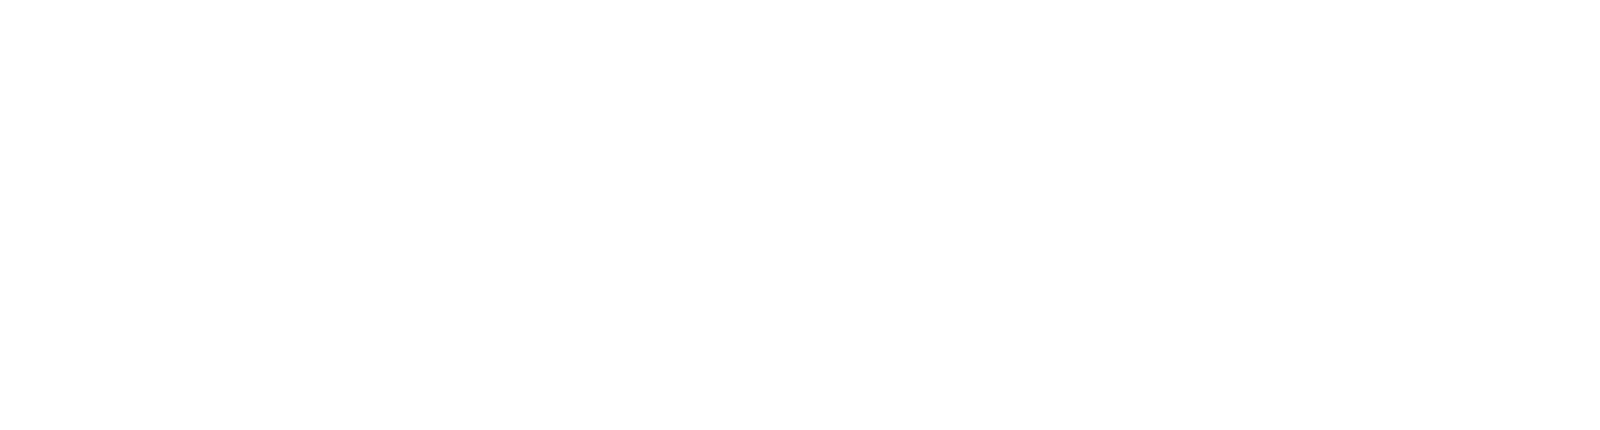 FranSec: Cyber Security Conference